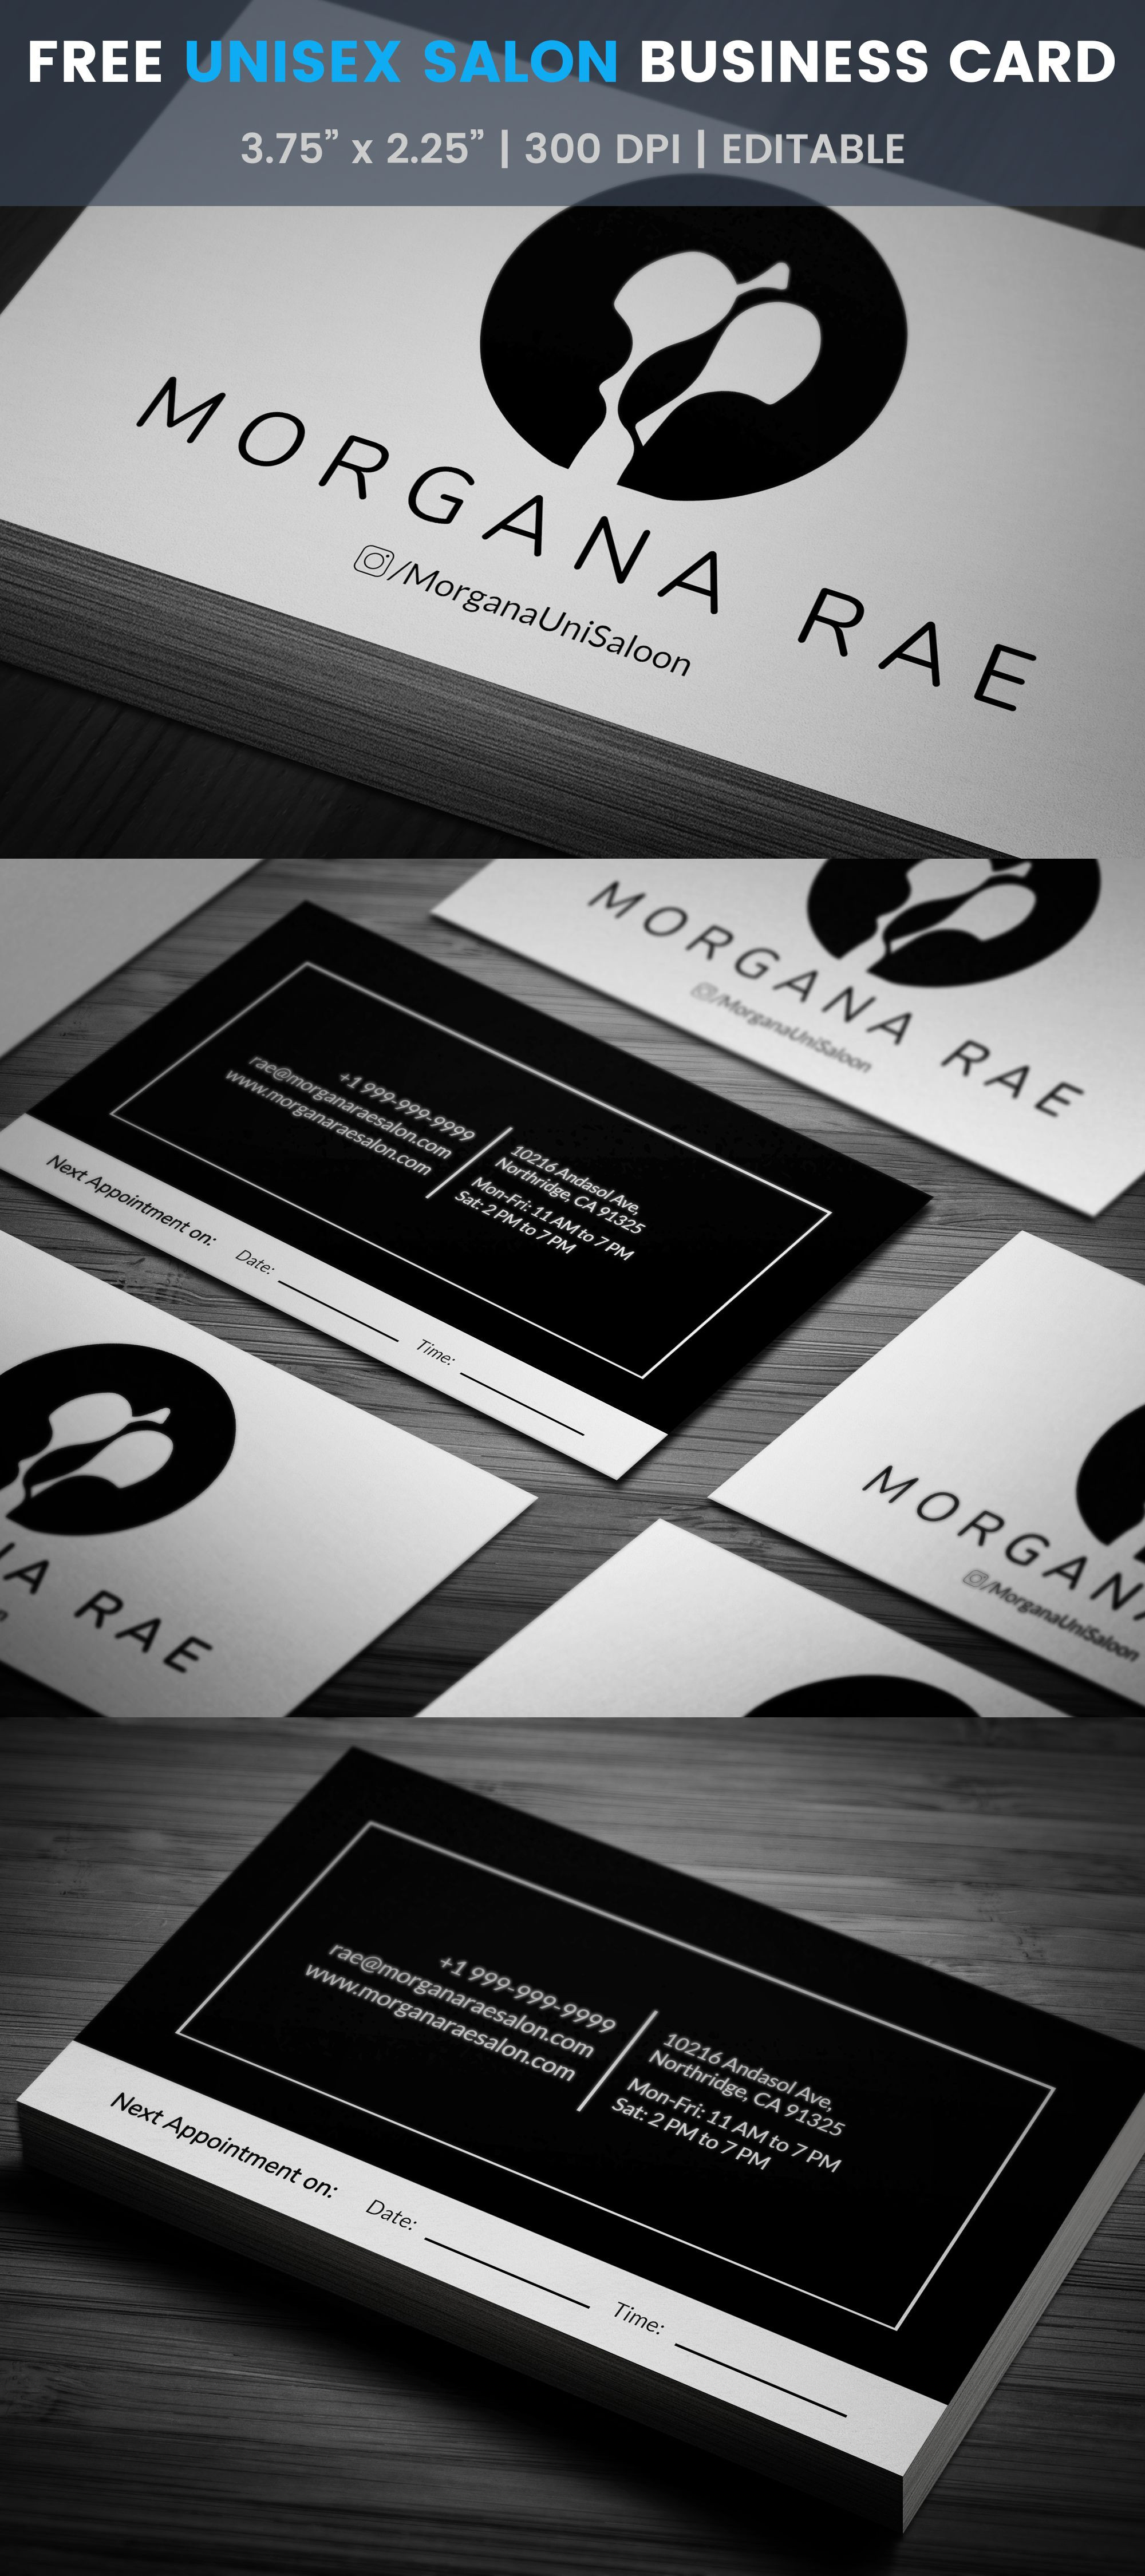 Uni Hair Salon Business Card Template Look Style Of Business Cards Templates Free Print at Home